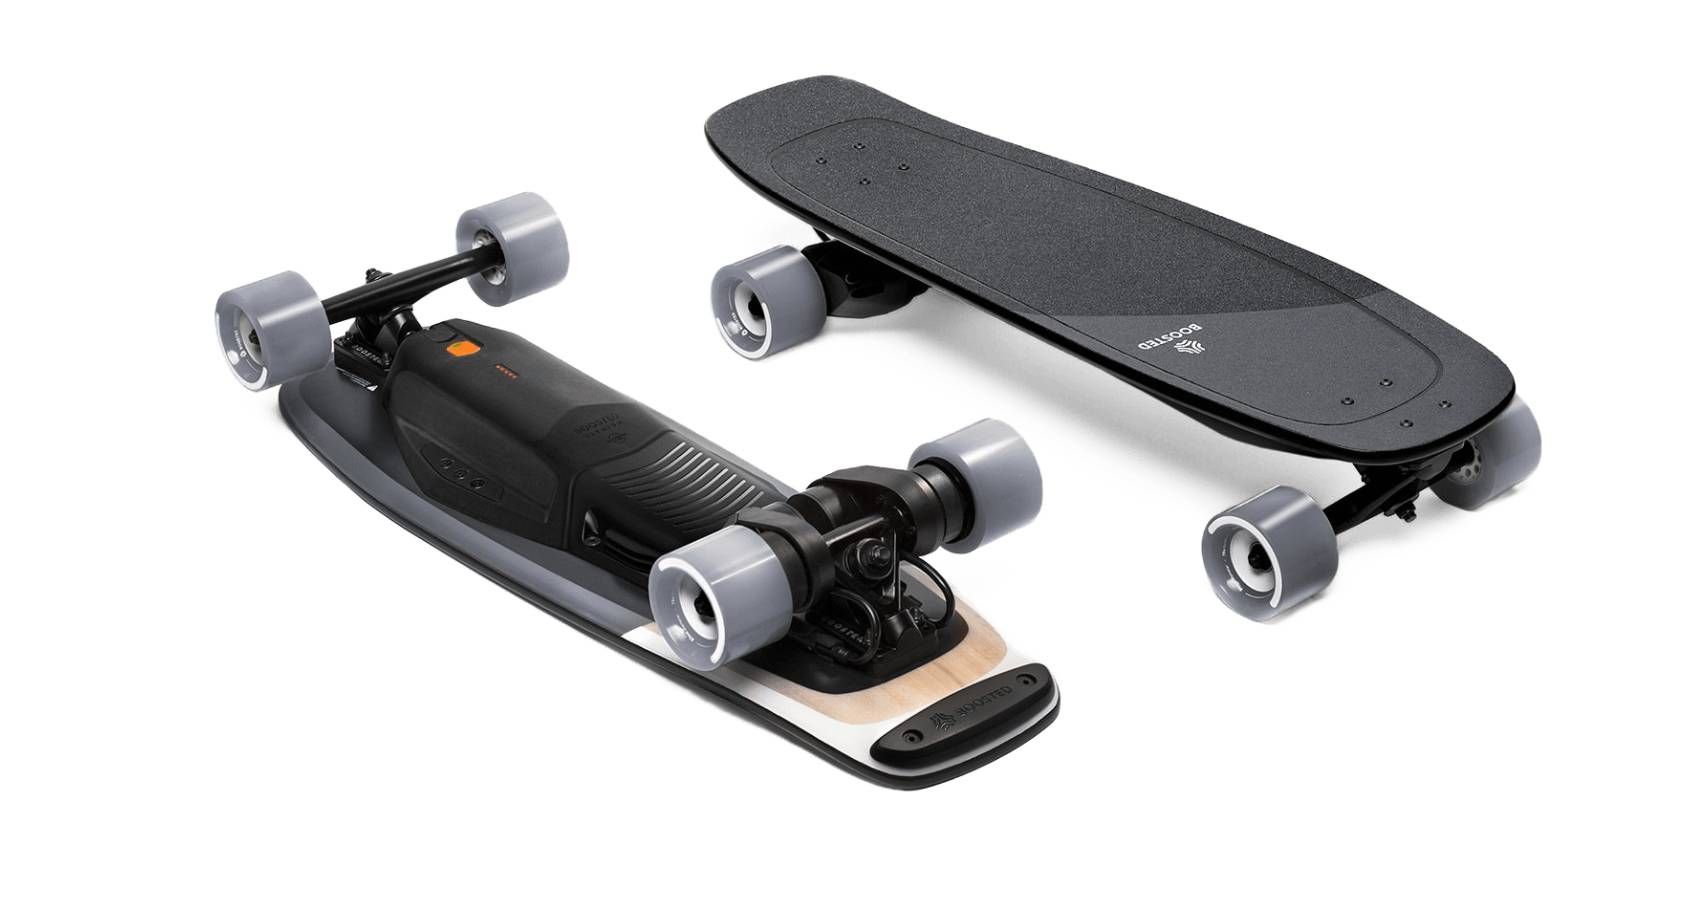 Features of the Boosted-Mini-X